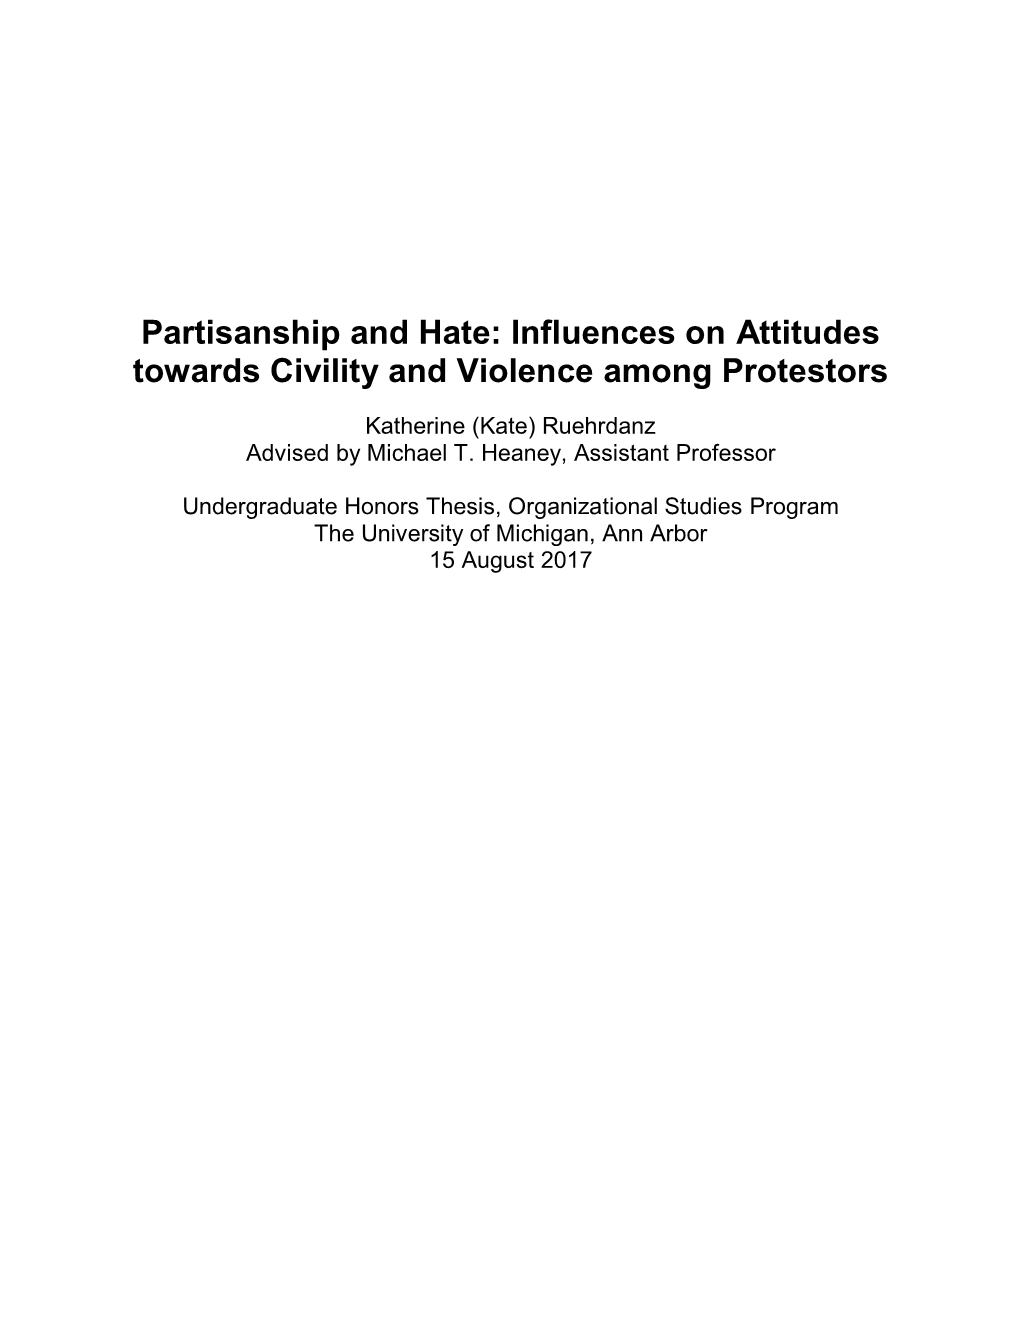 Influences on Attitudes Towards Civility and Violence Among Protestors